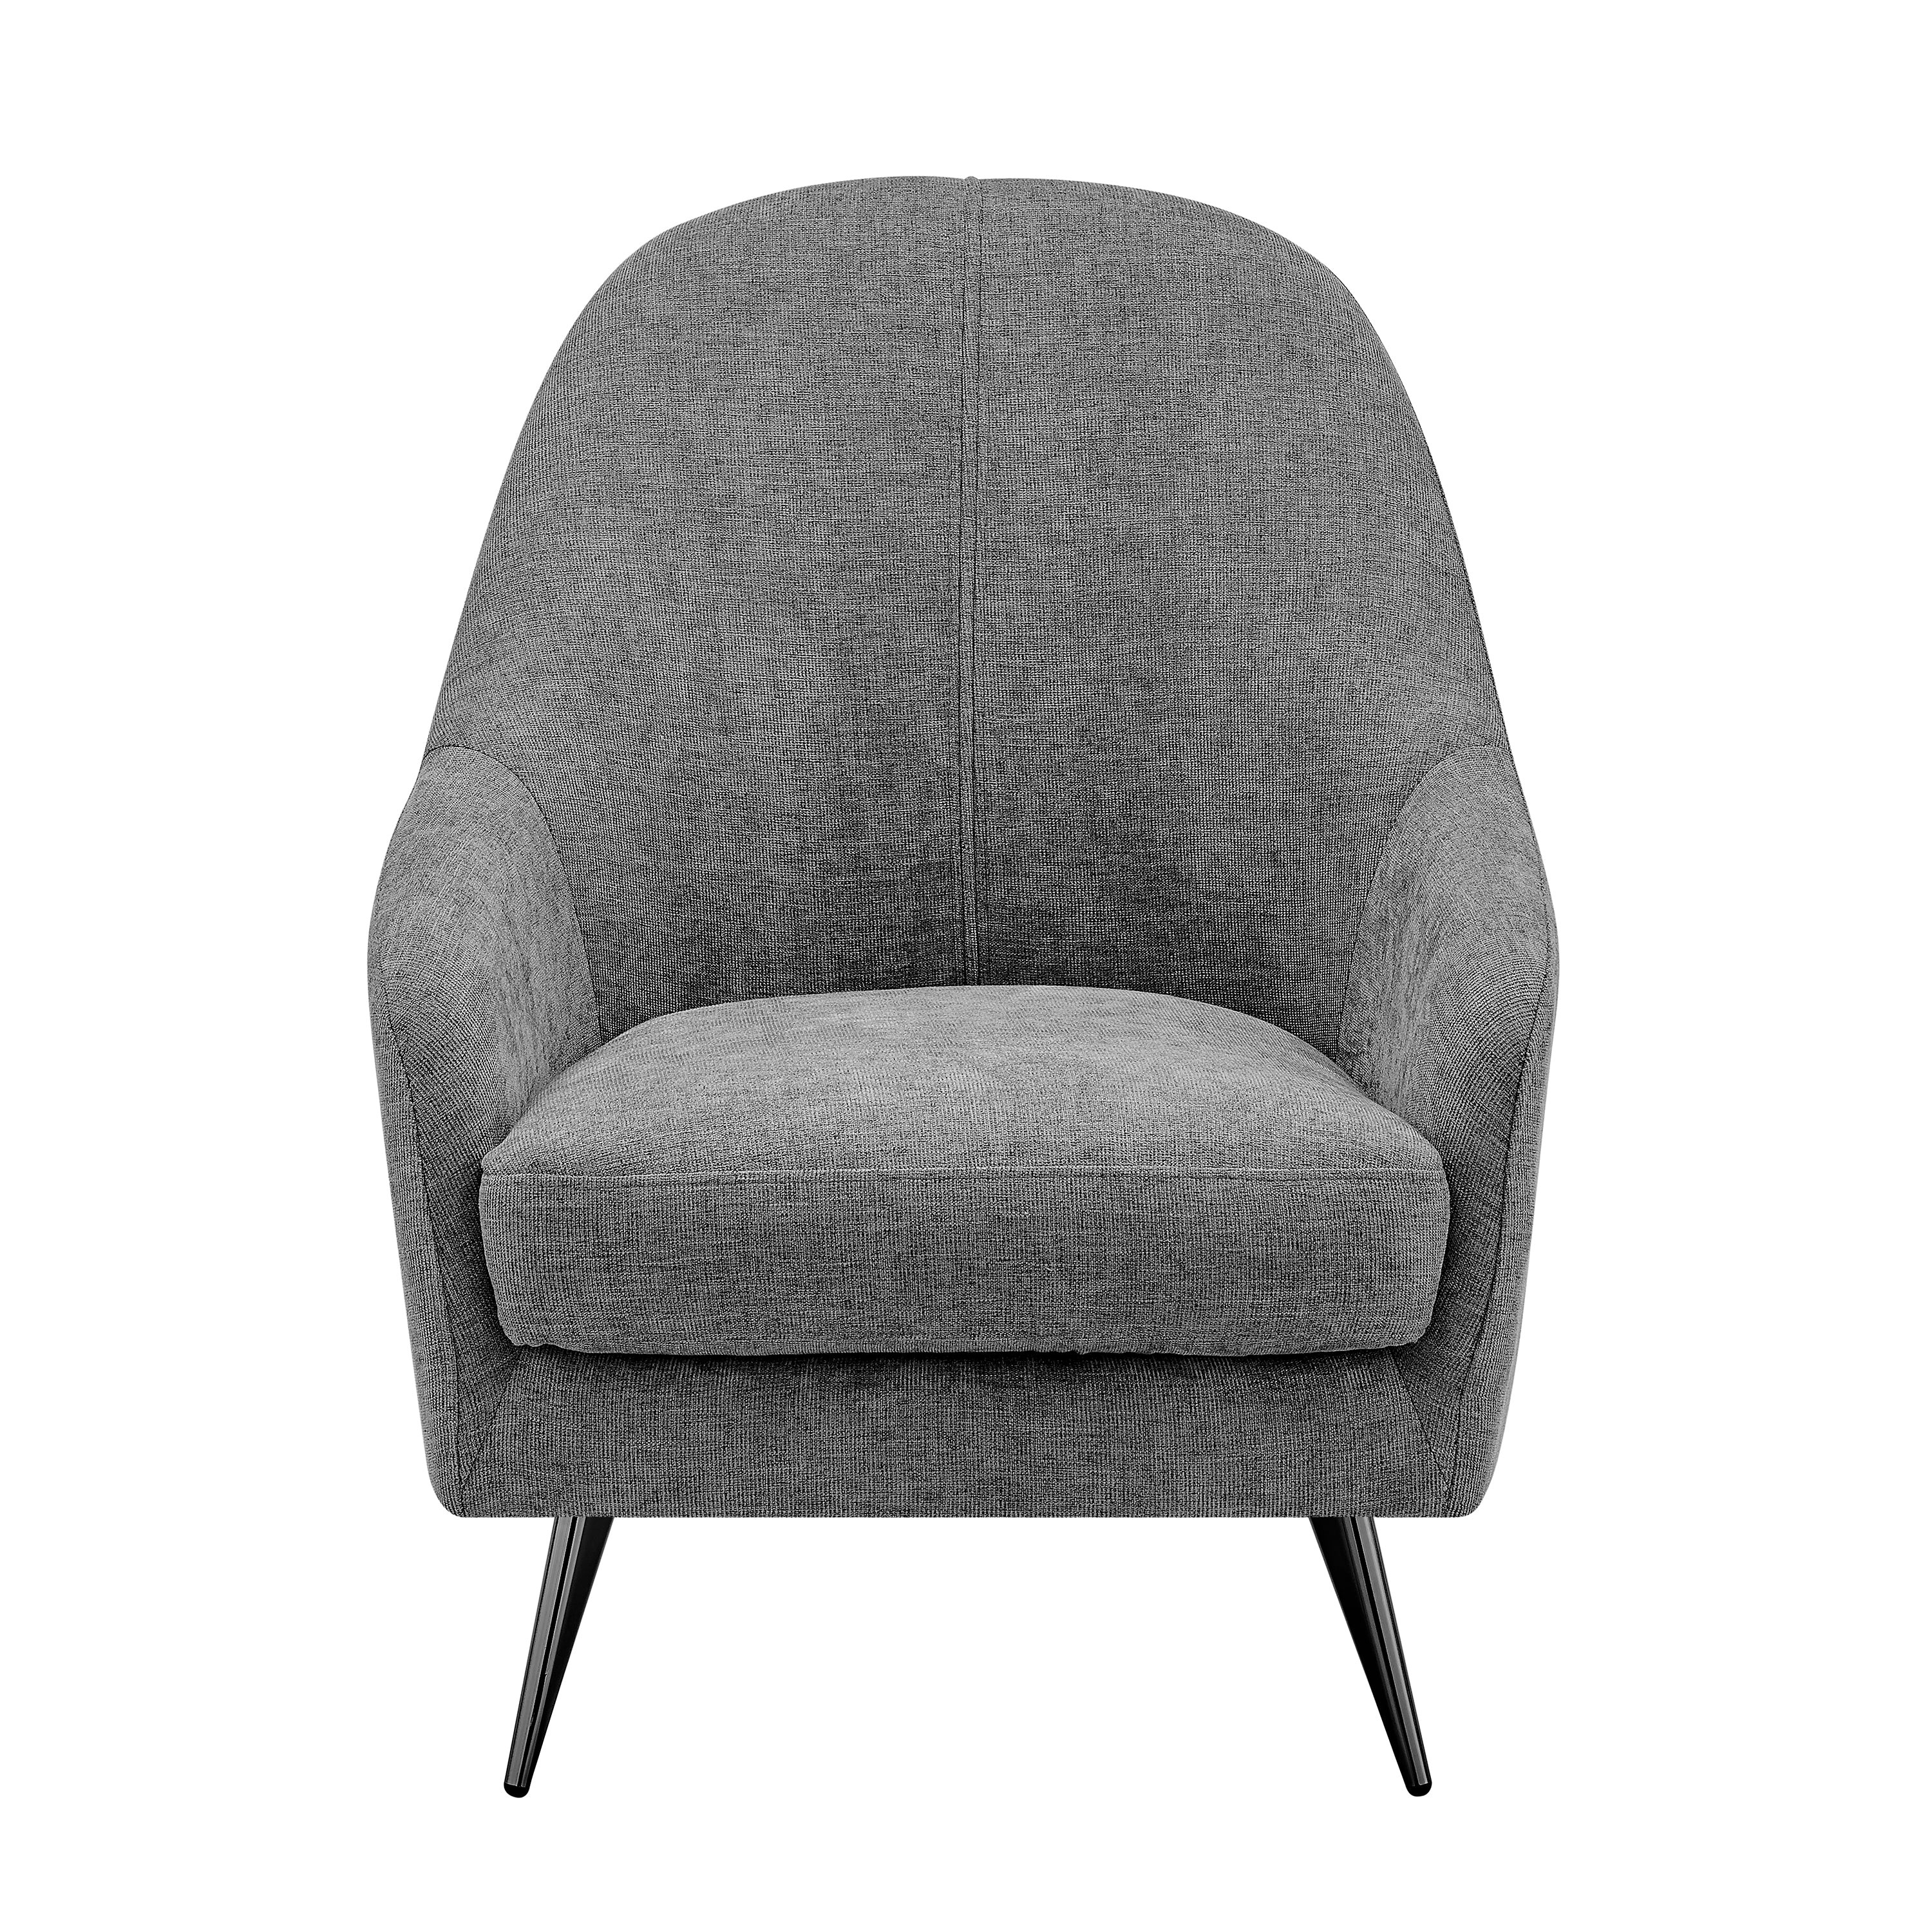 Euro Style Accent Chairs - Selene Lounge Chair in Gray Fabric with Black Chrome Steel Legs